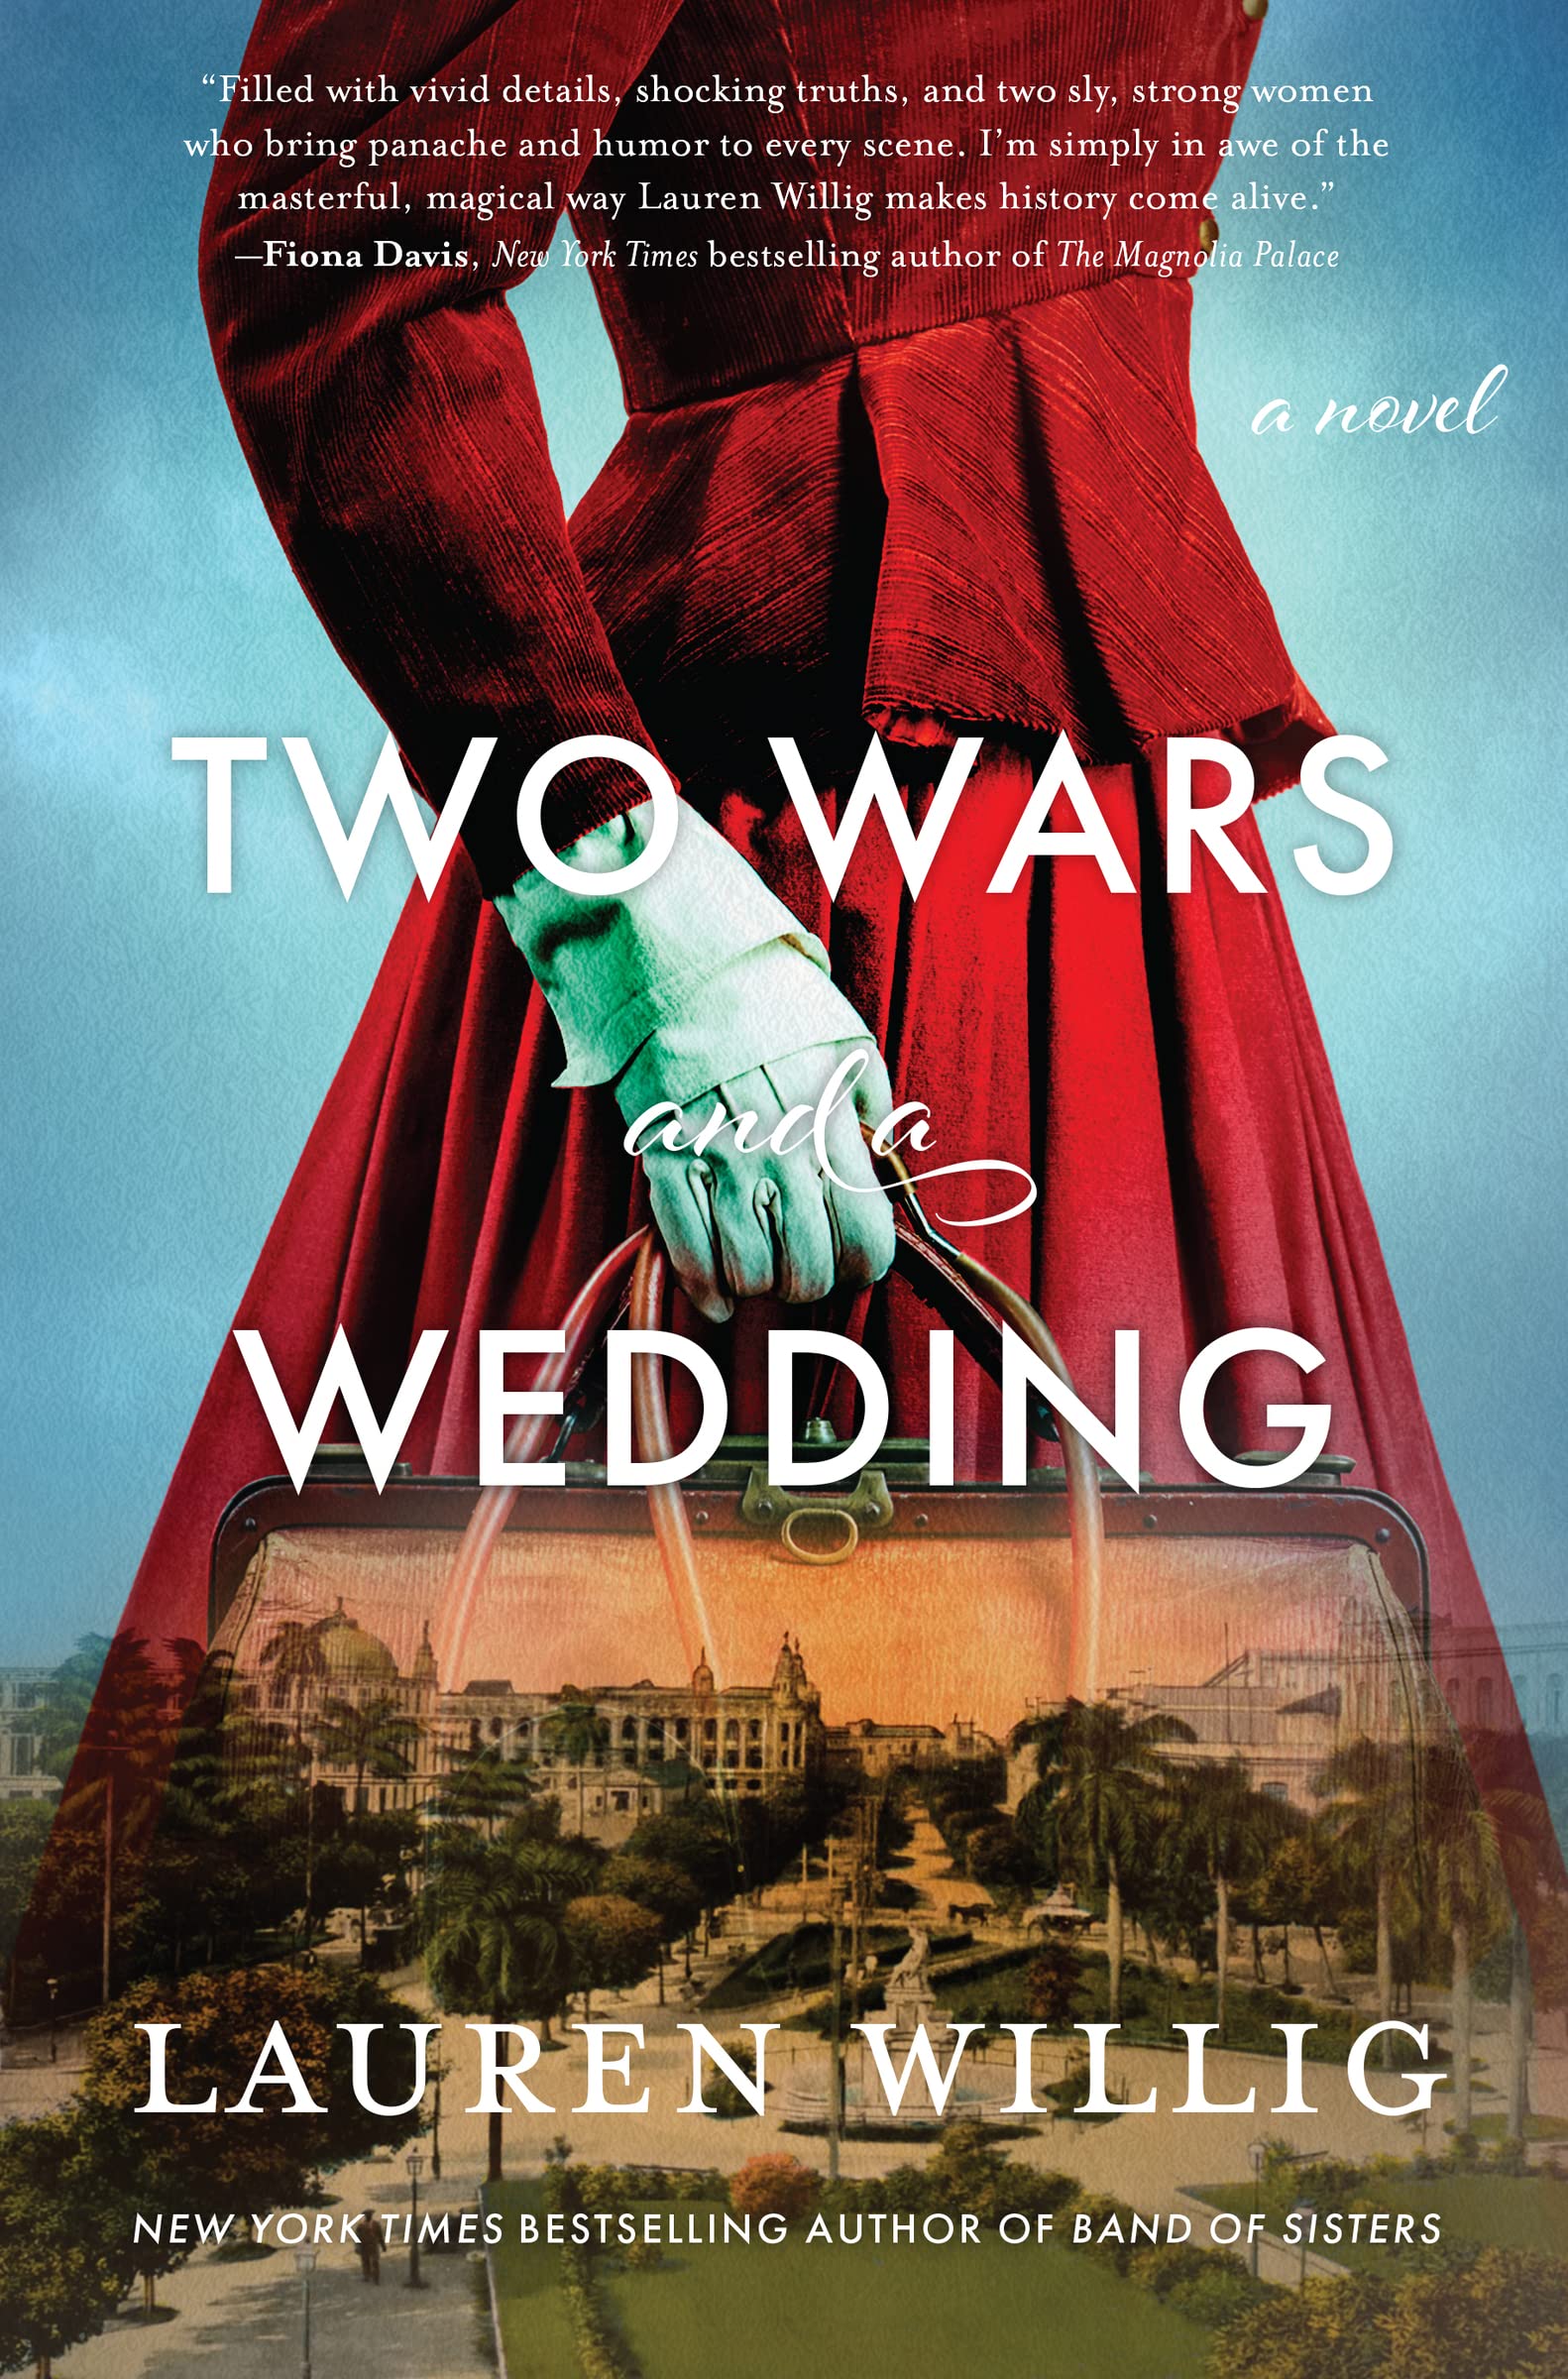 Image for "Two Wars and a Wedding"